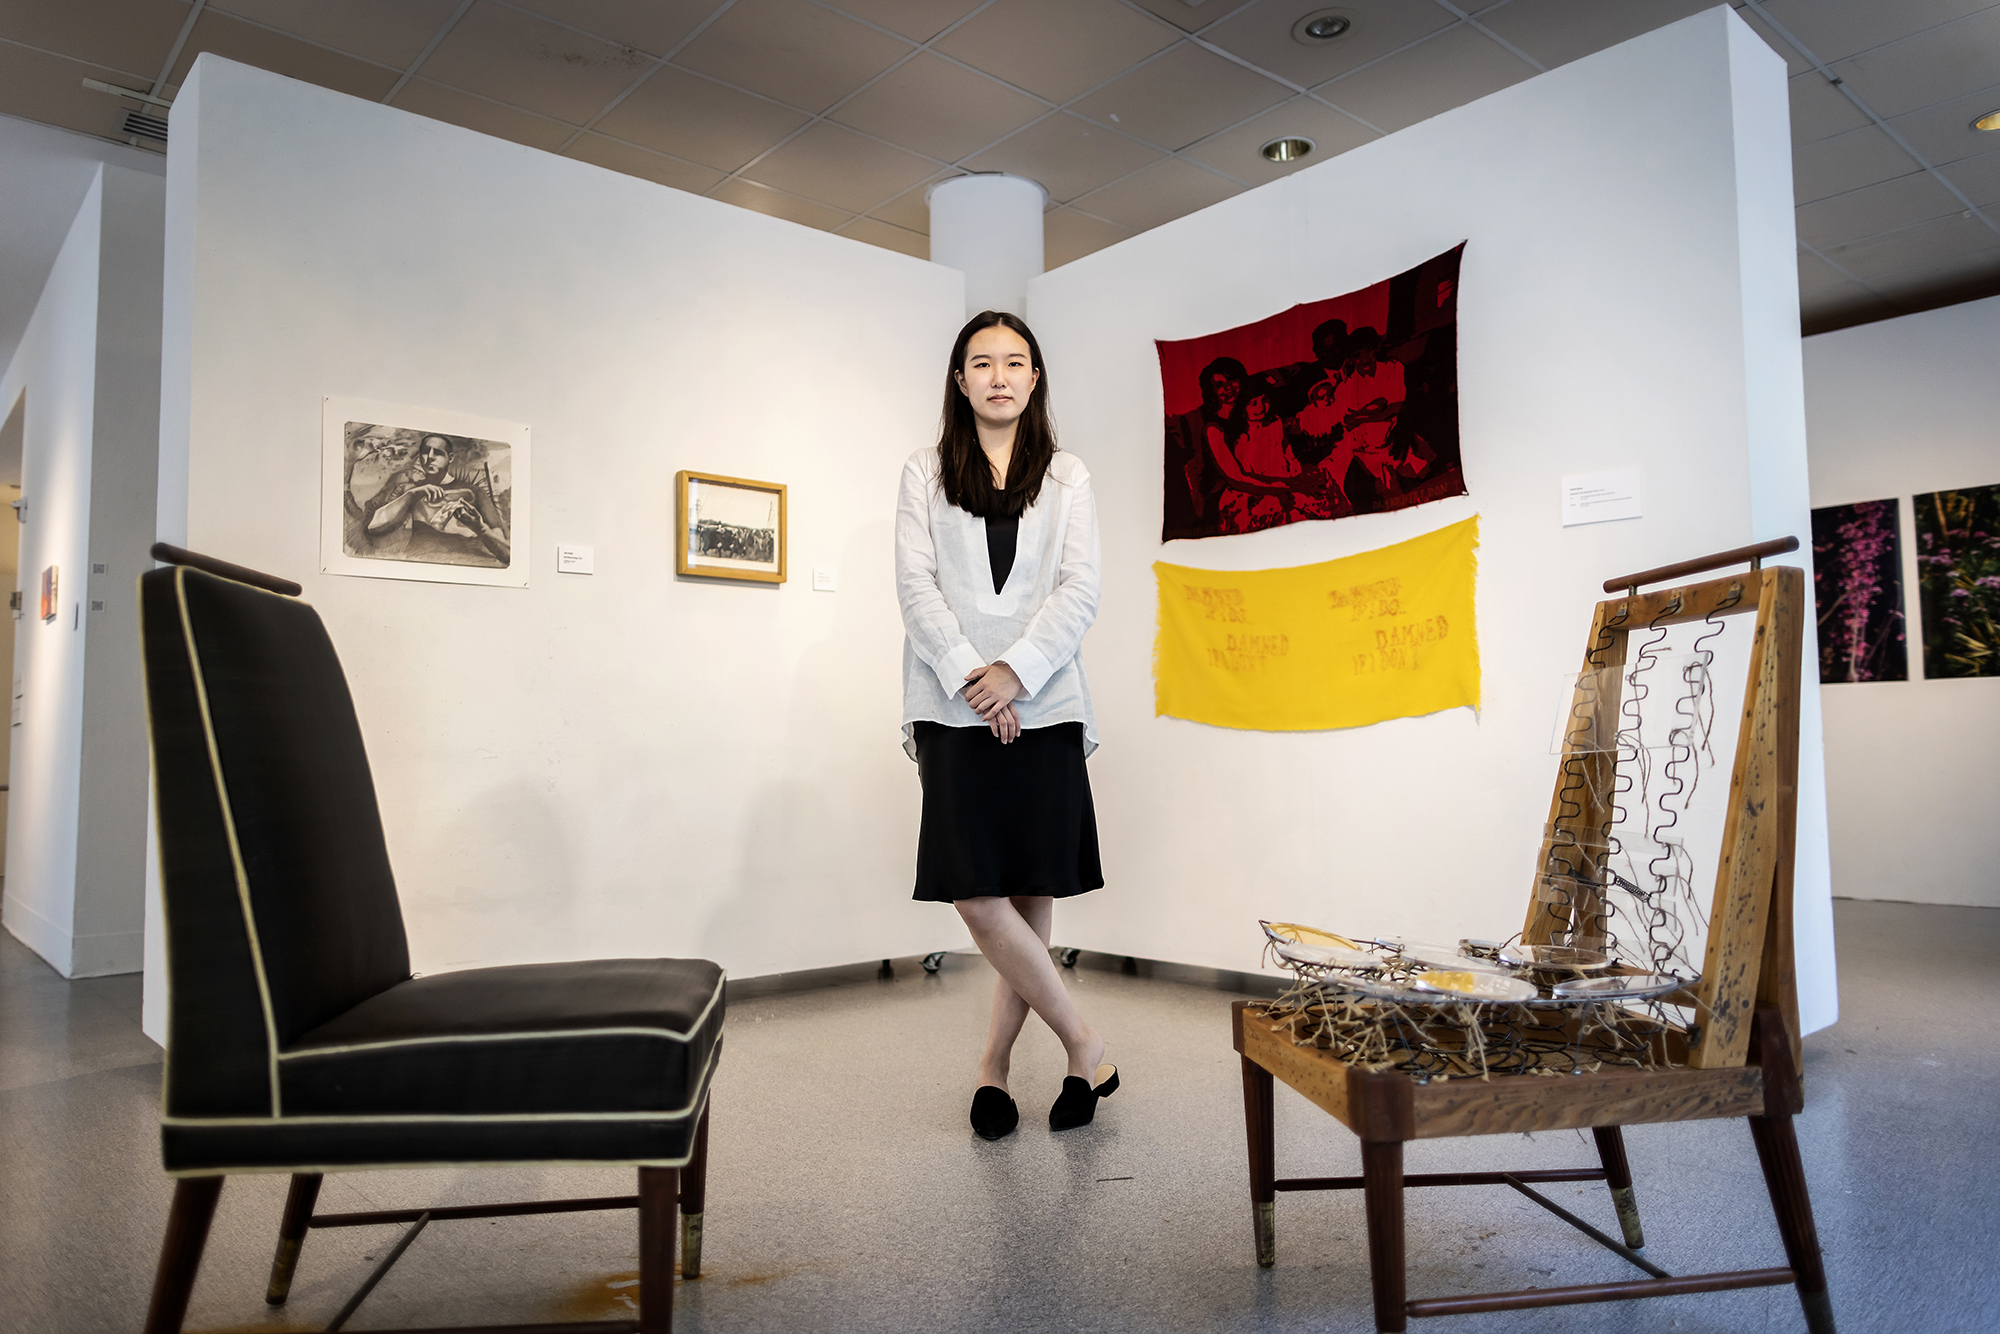 Kay Seohyung Lee standing in art gallery with an installation with two chairs in front of her and a wall with four artworks behind her.